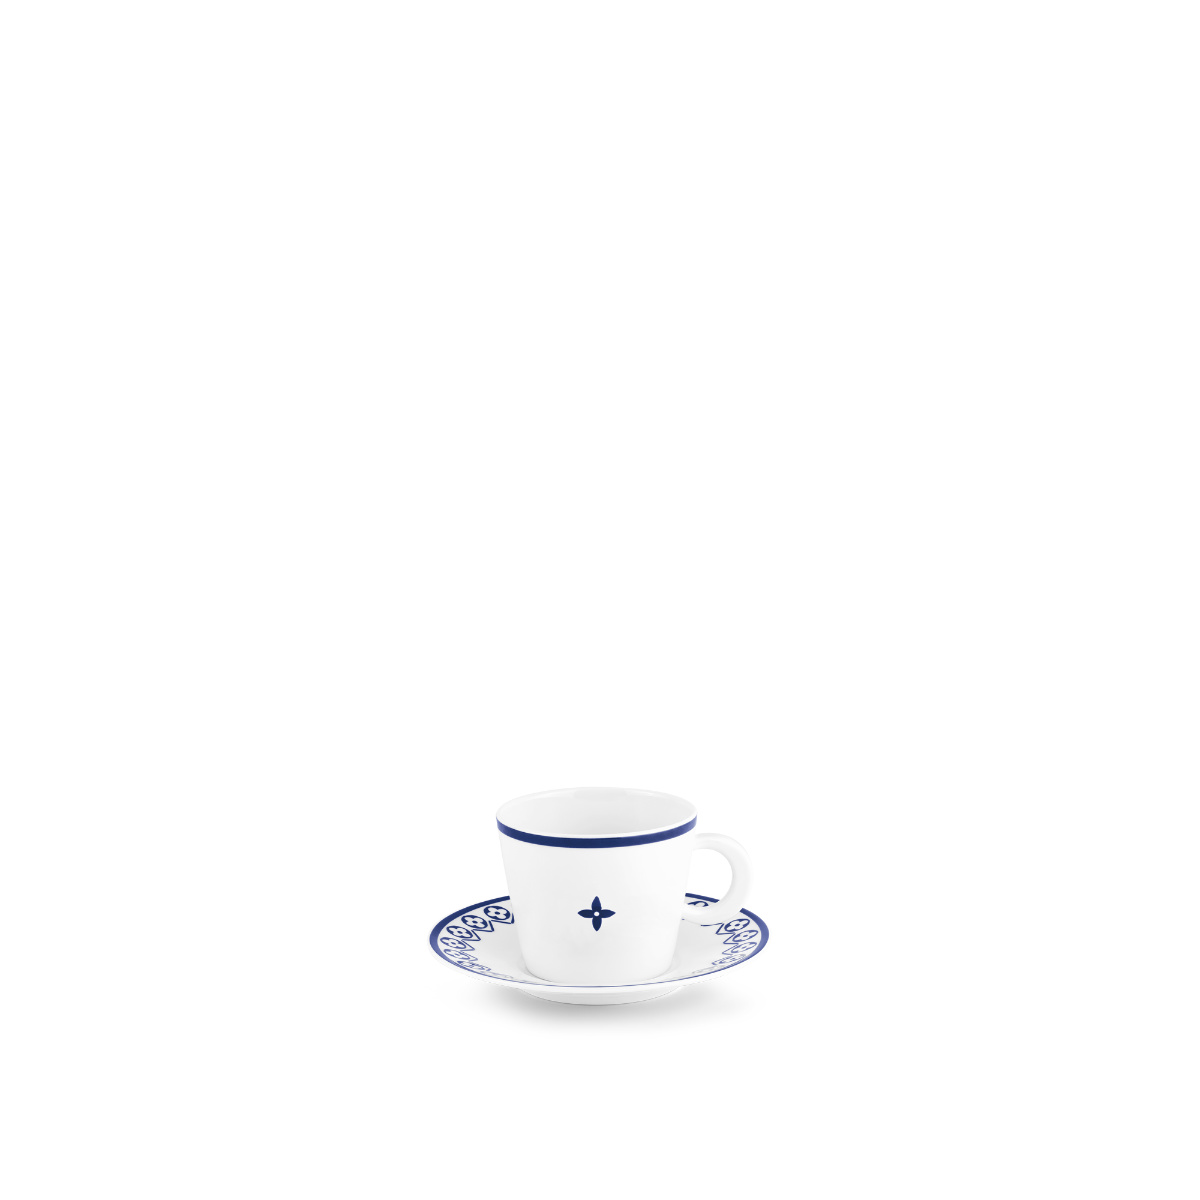 Louis Vuitton Presents Its First Tableware Collection